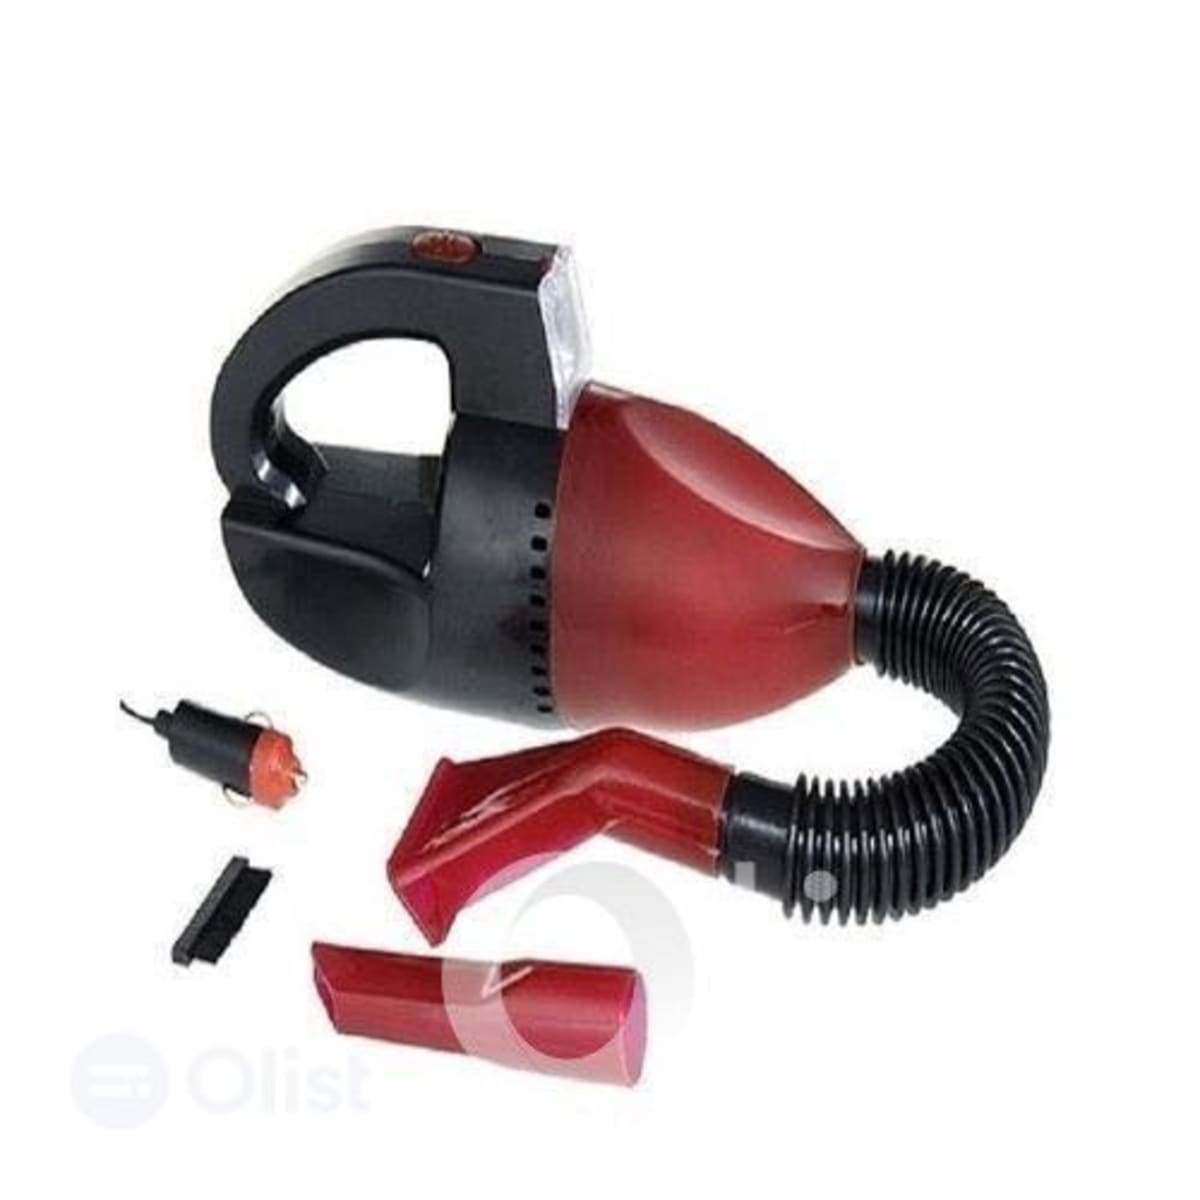 Portable Compact Car Vacuum Cleaner - 12V - 60W